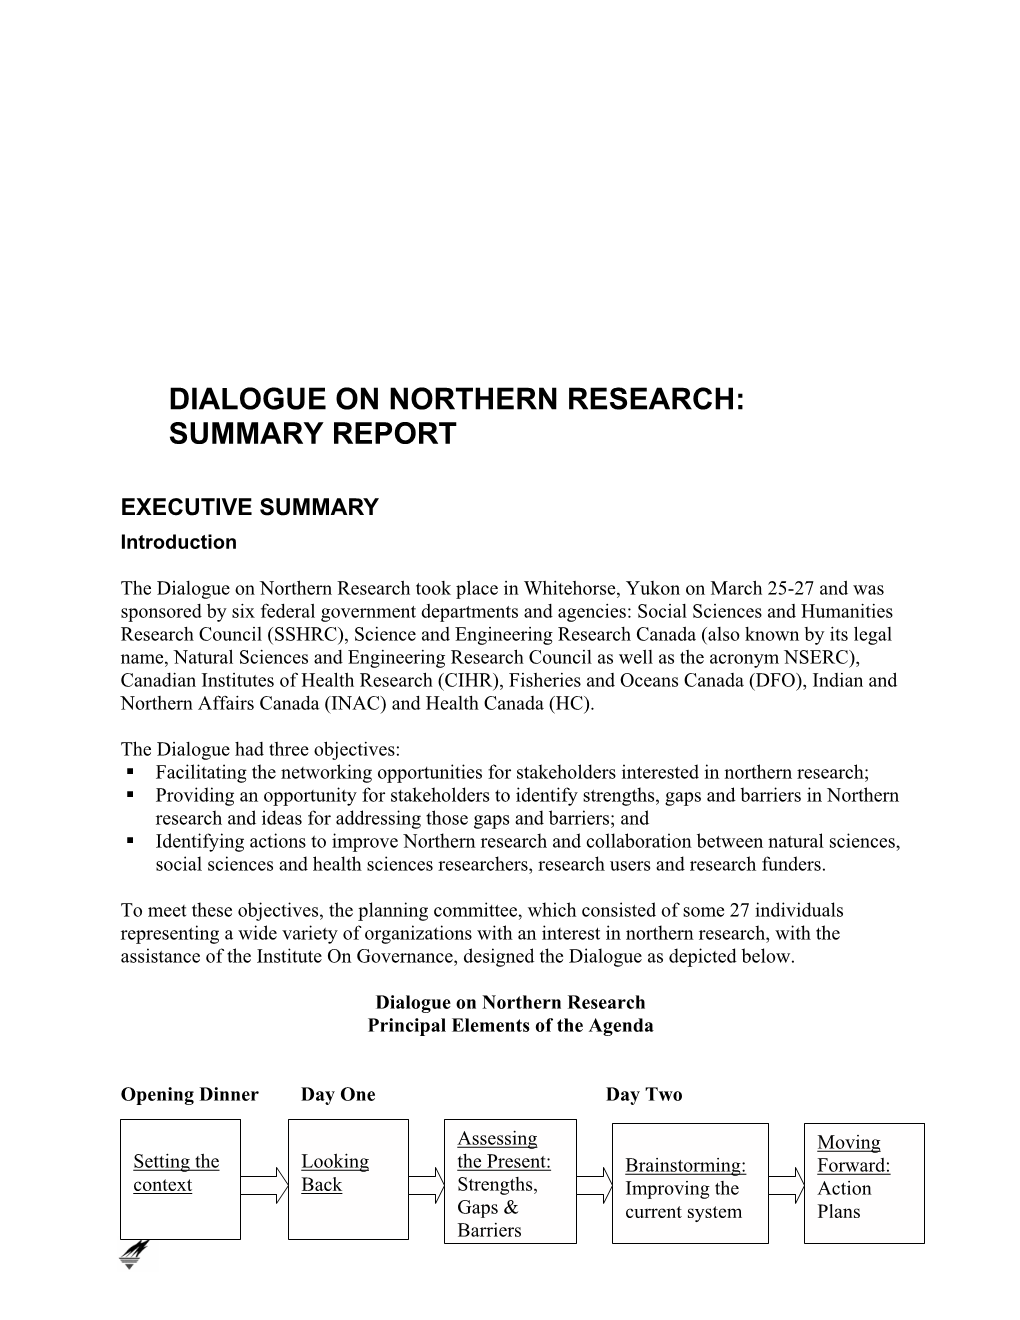 Dialogue on Northern Research: Summary Report